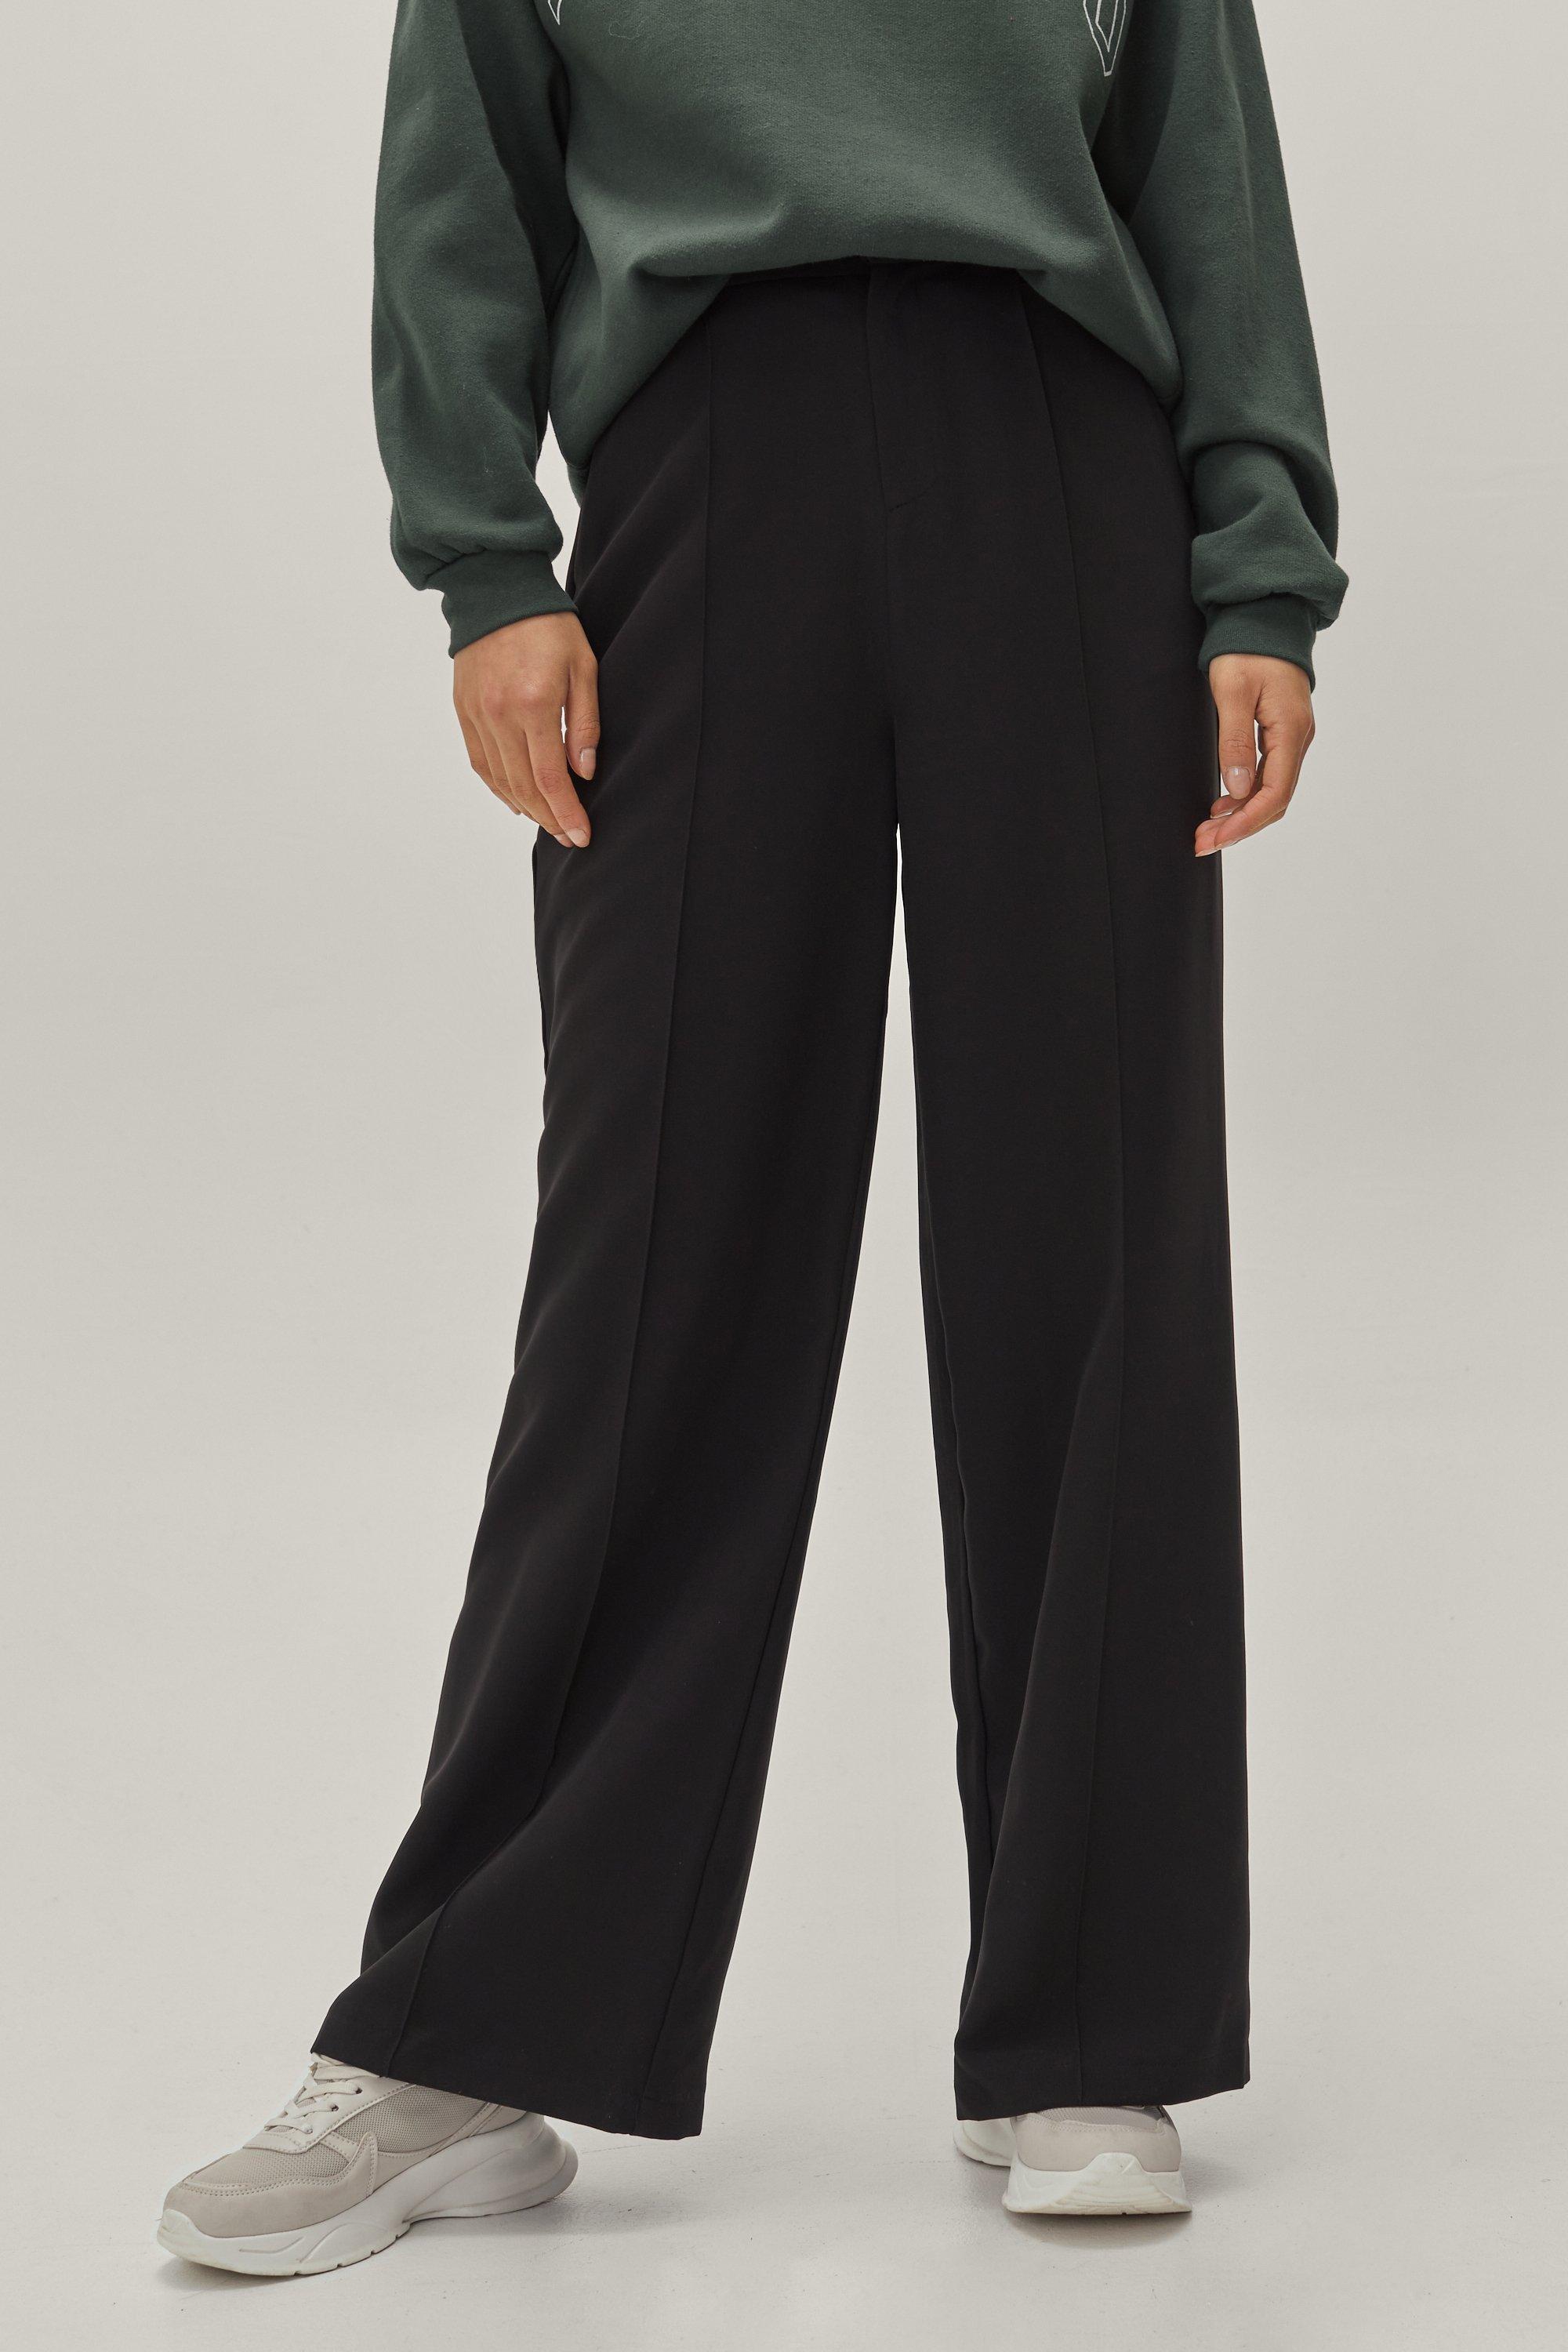 Pintucked trousers-smooth | hospitaldaprovidencia.org.br